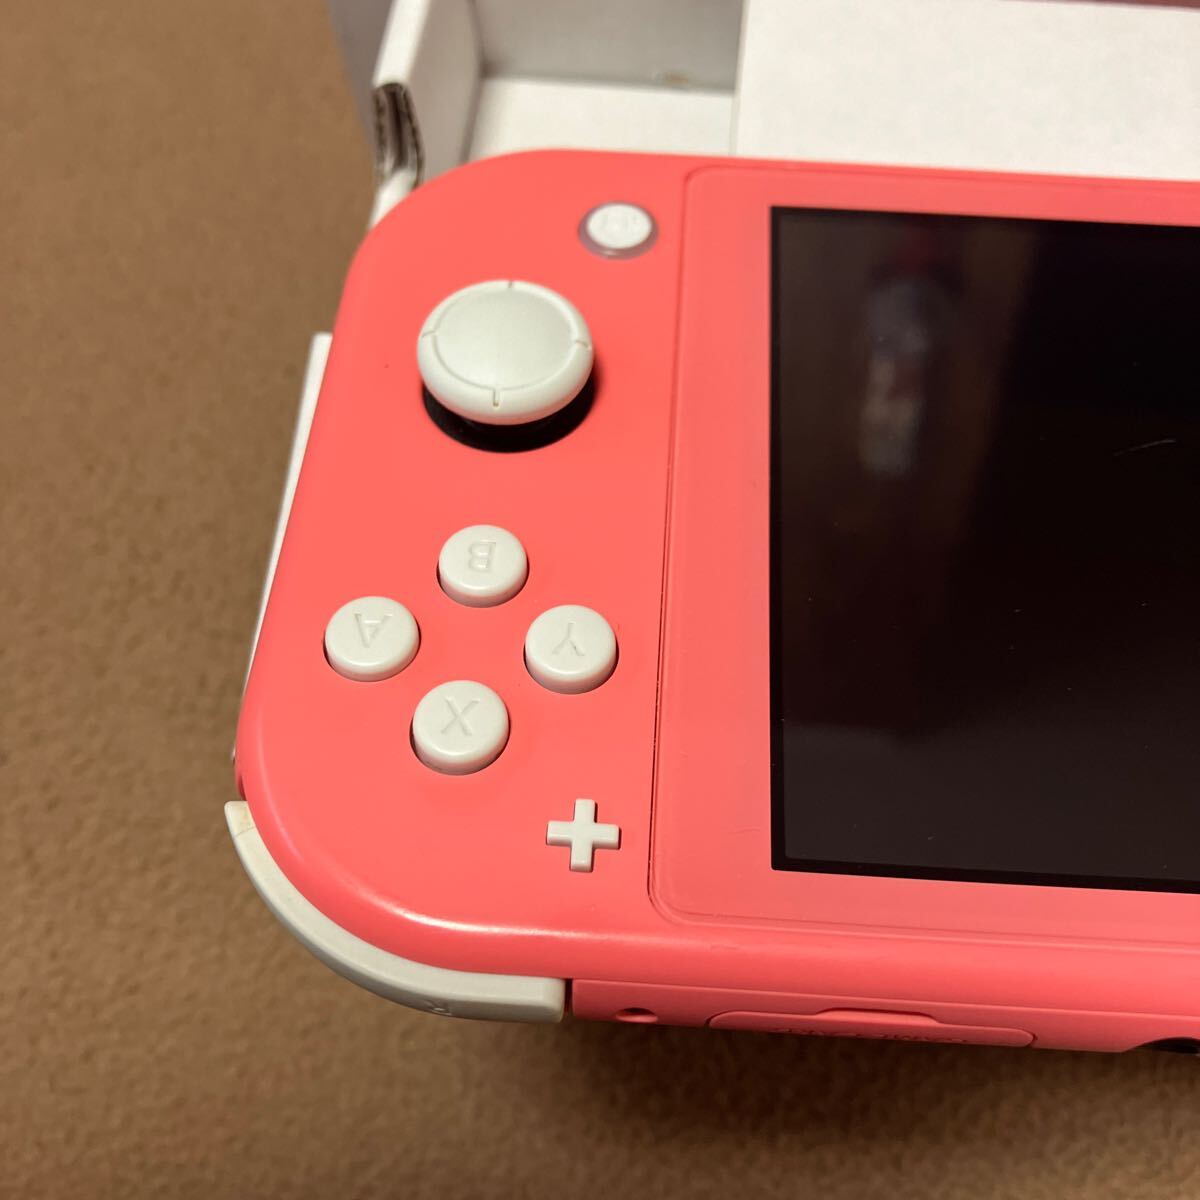  Nintendo switch light coral pink 